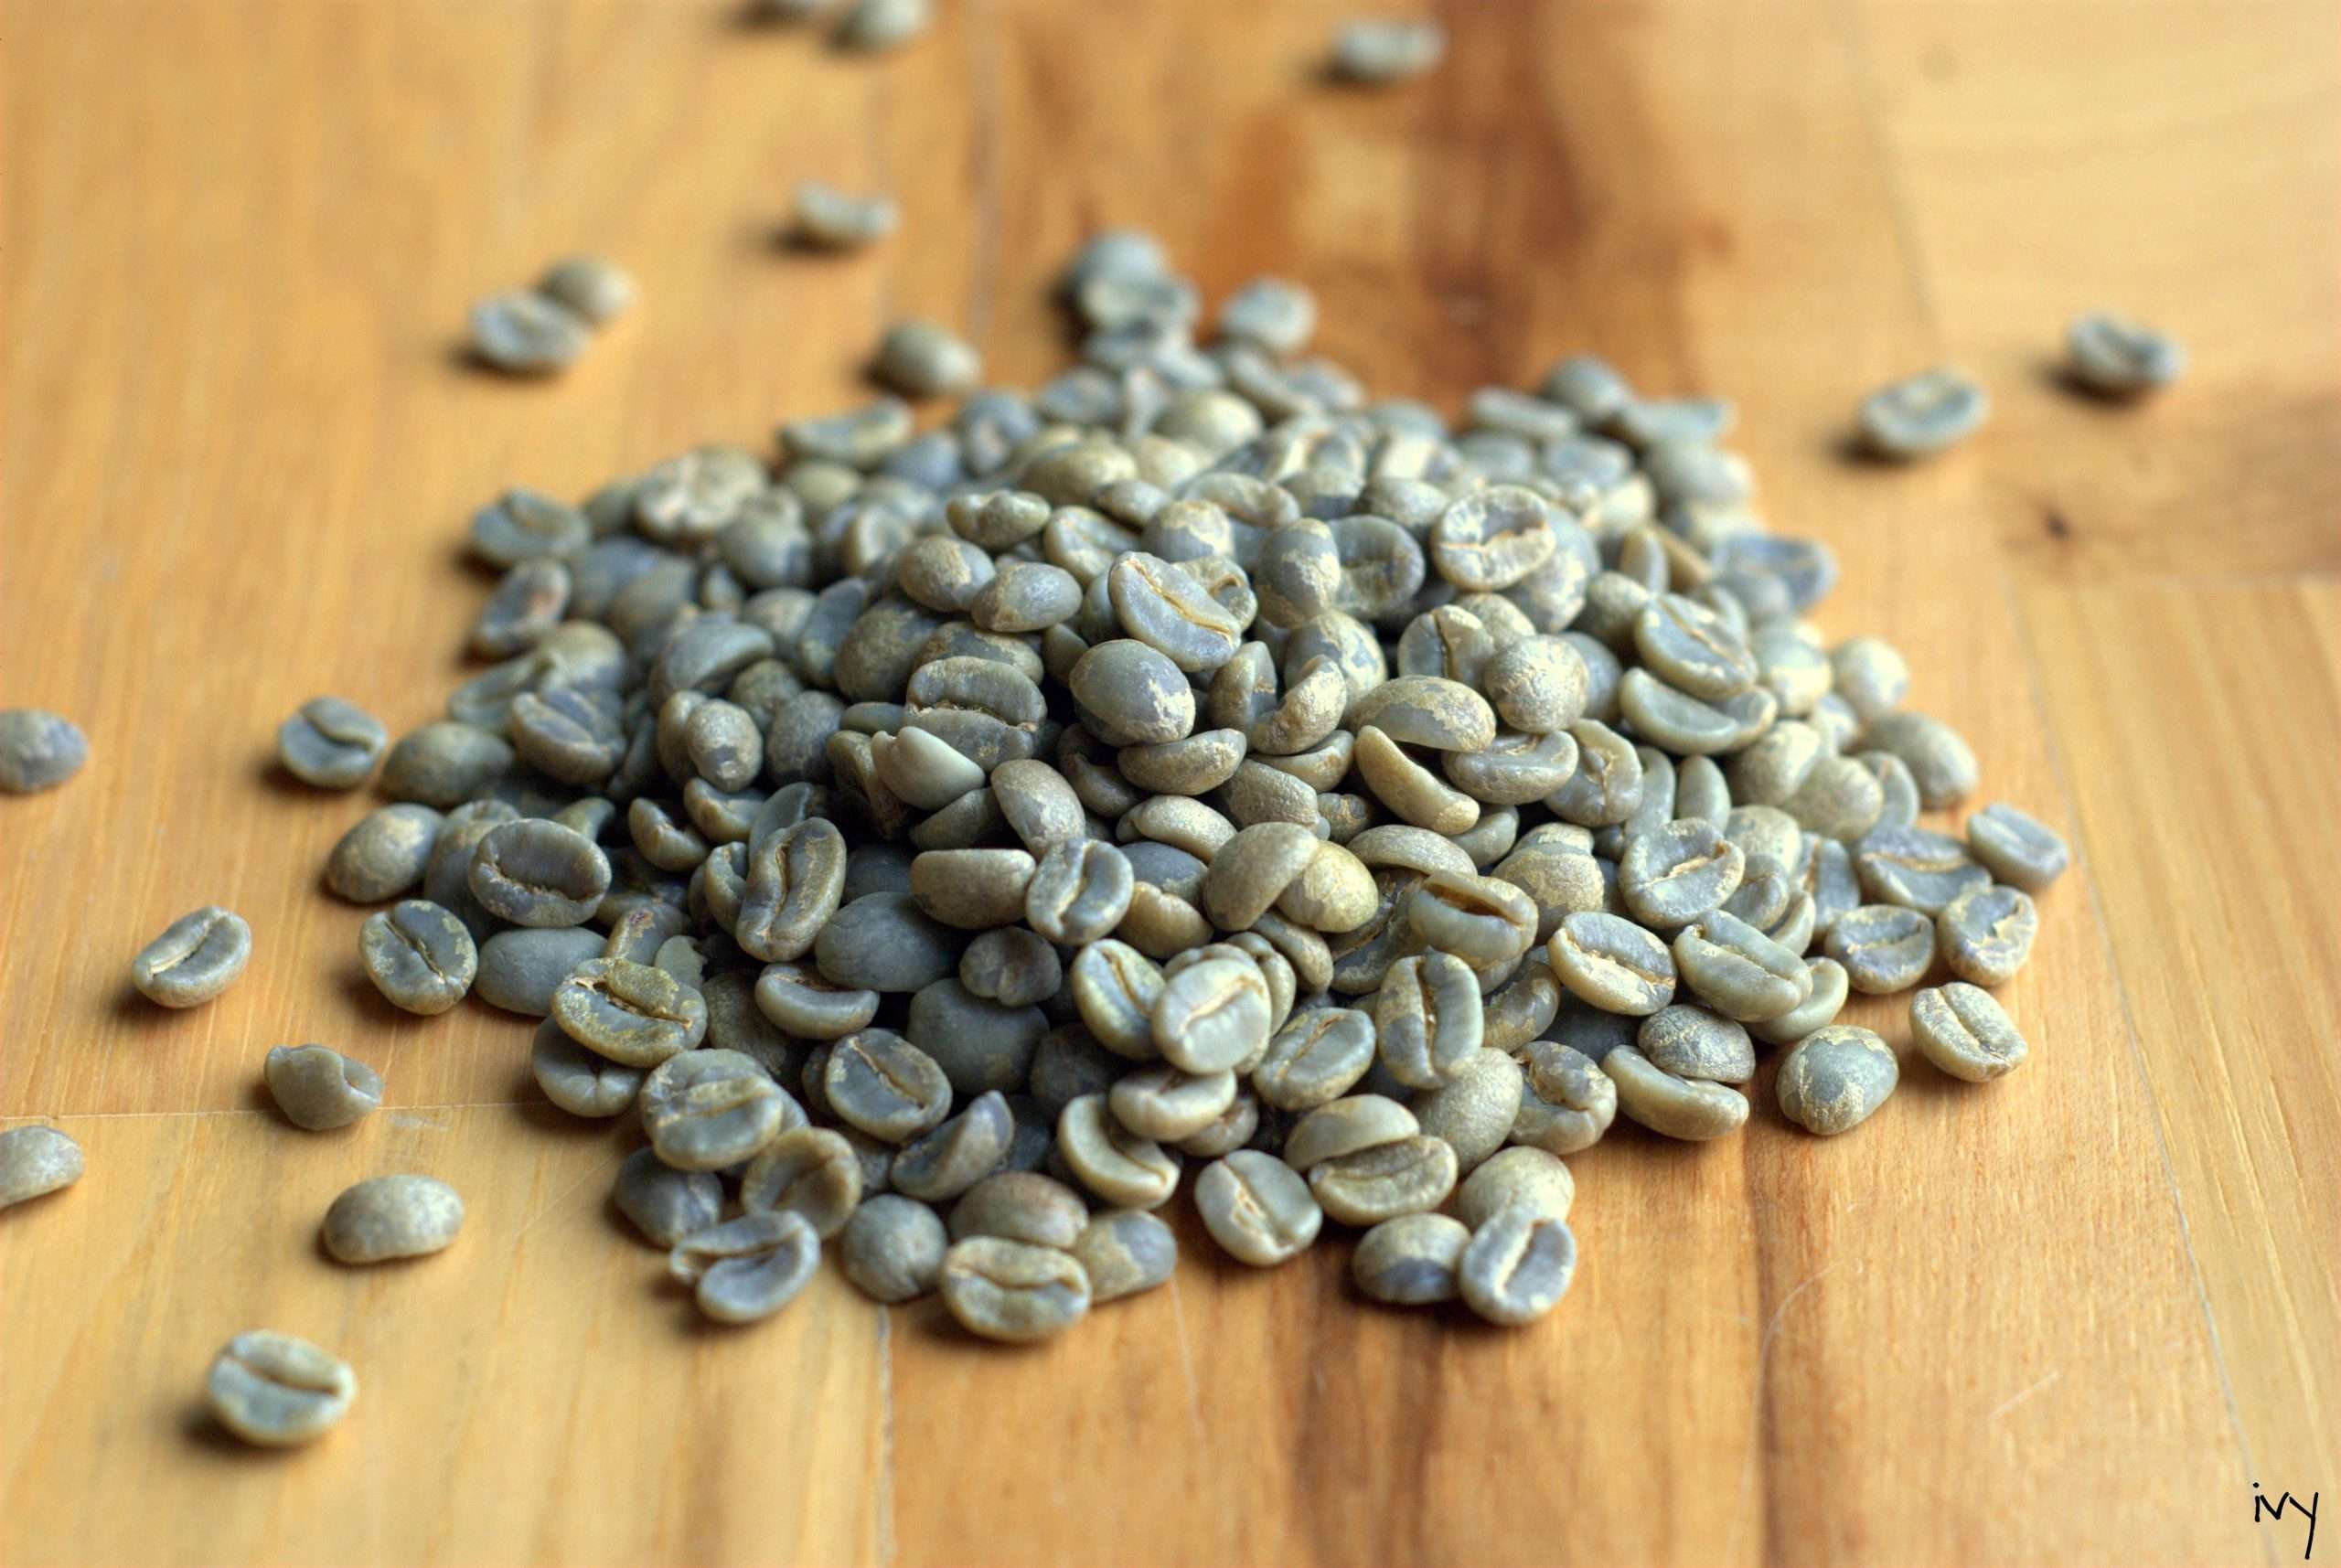 Green Coffee Beans: before they are roasted, coffee beans look like ...